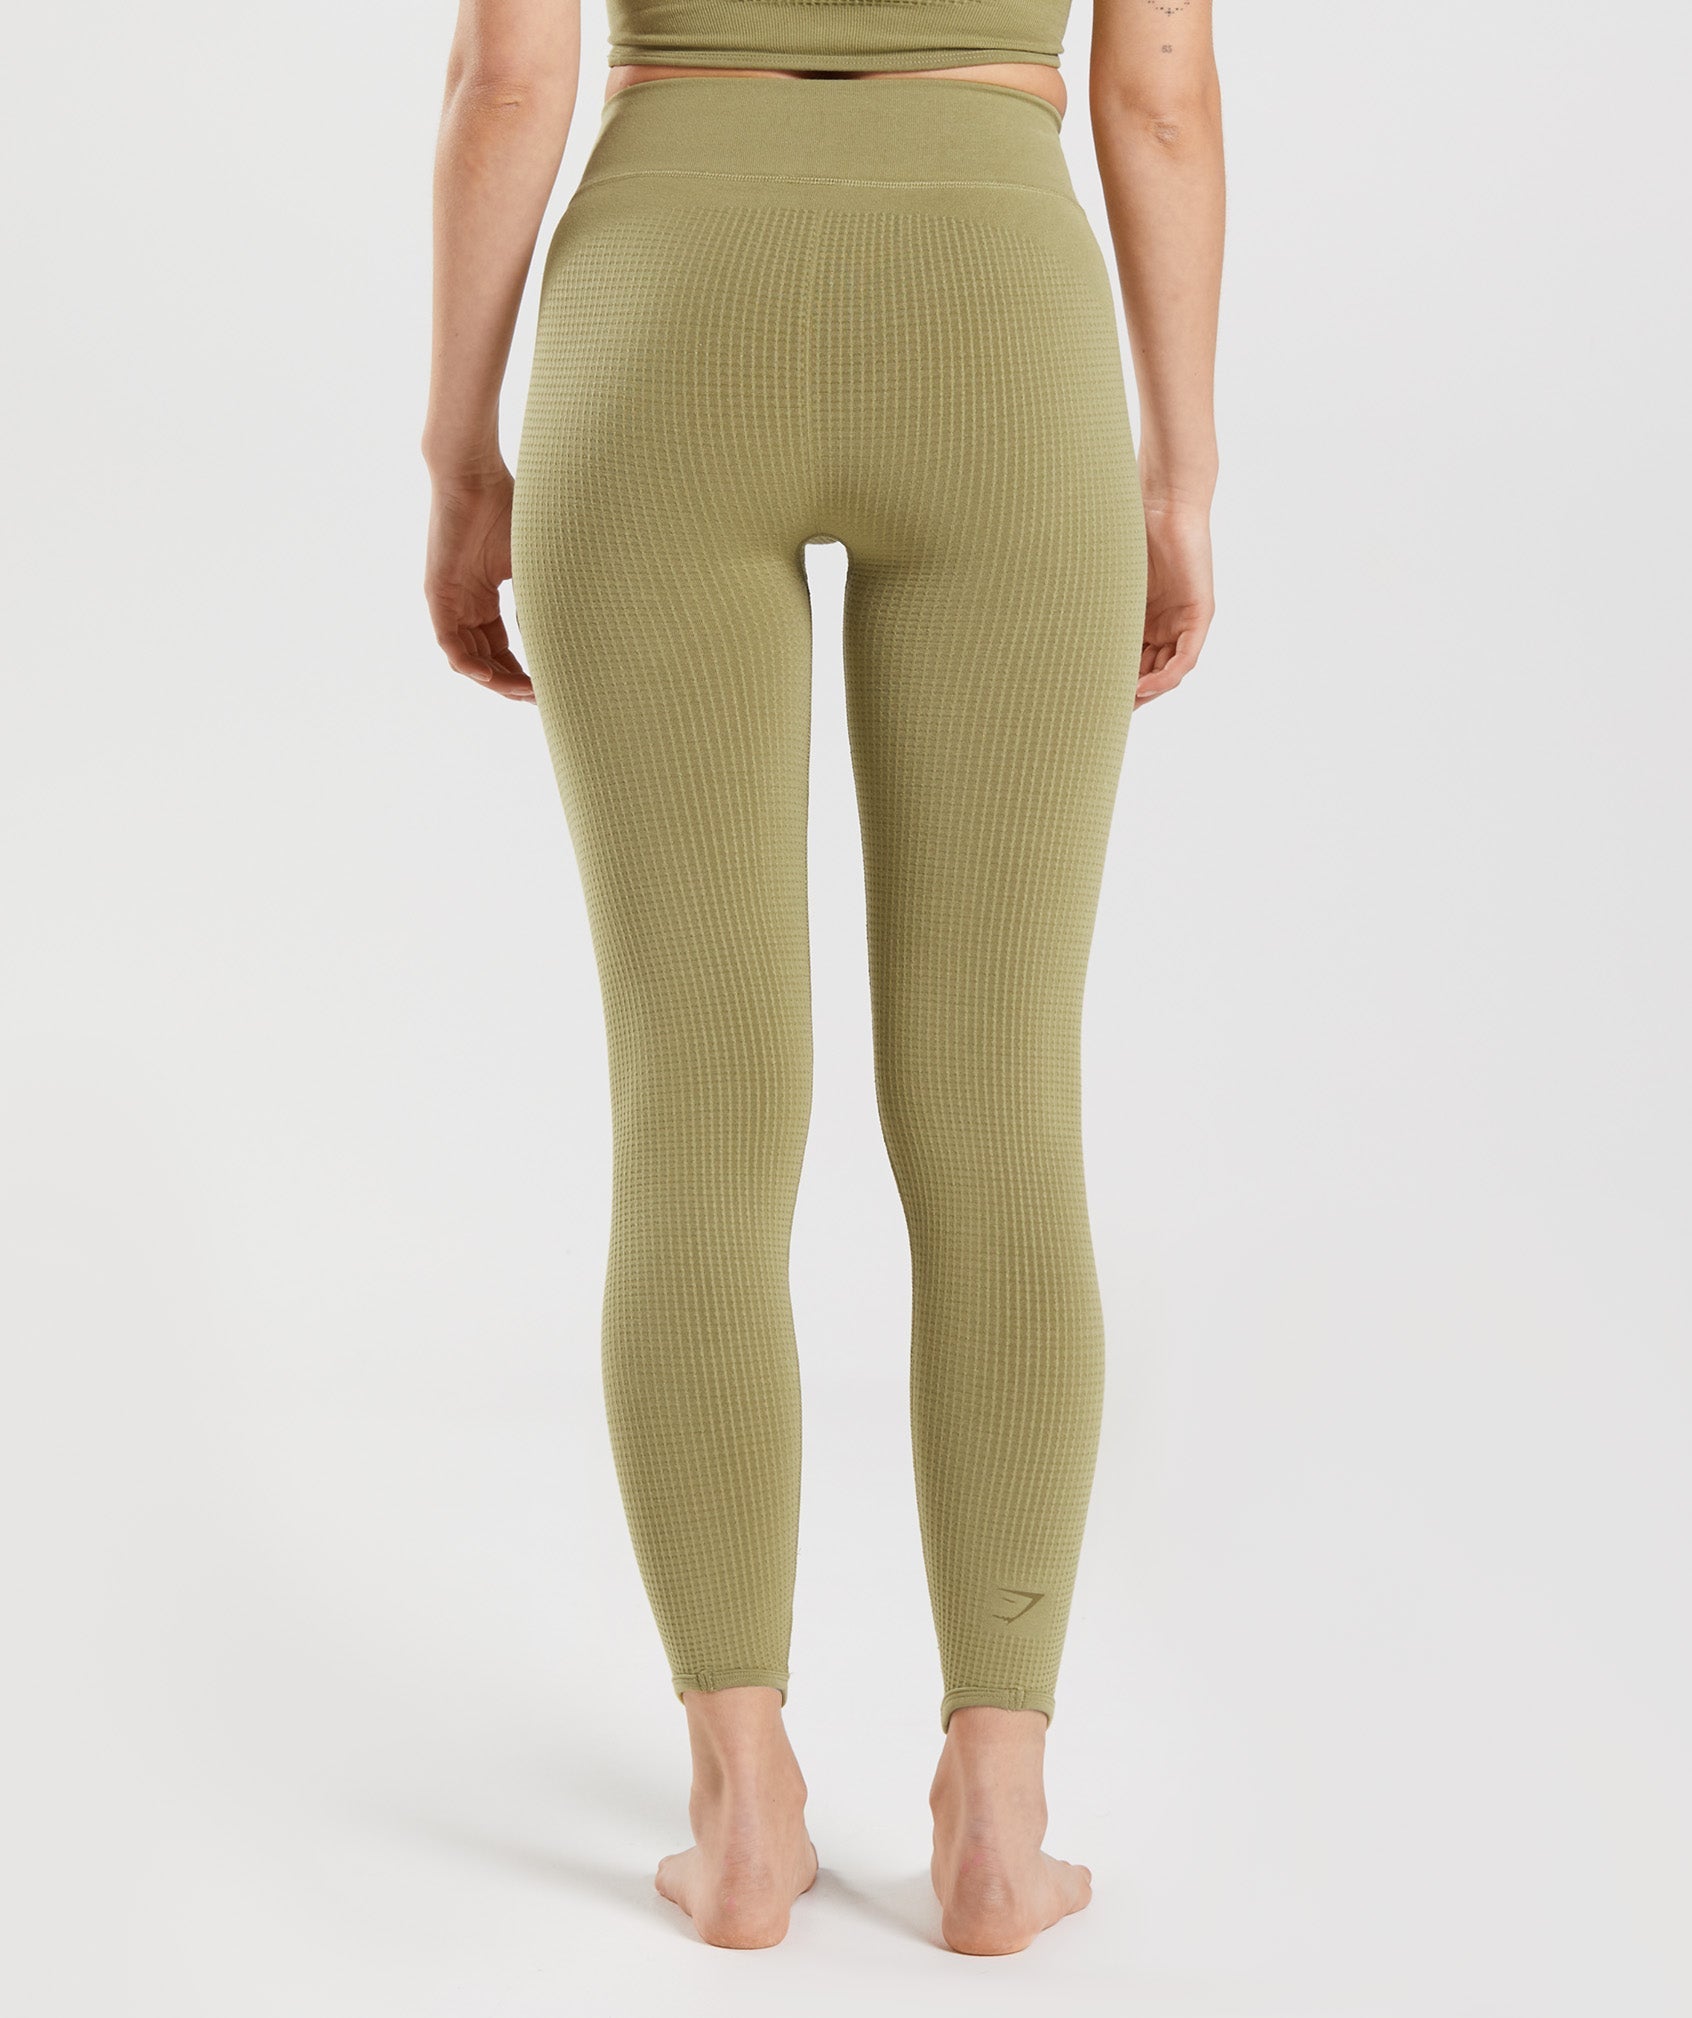 Pause Seamless Leggings in Griffin Green - view 2